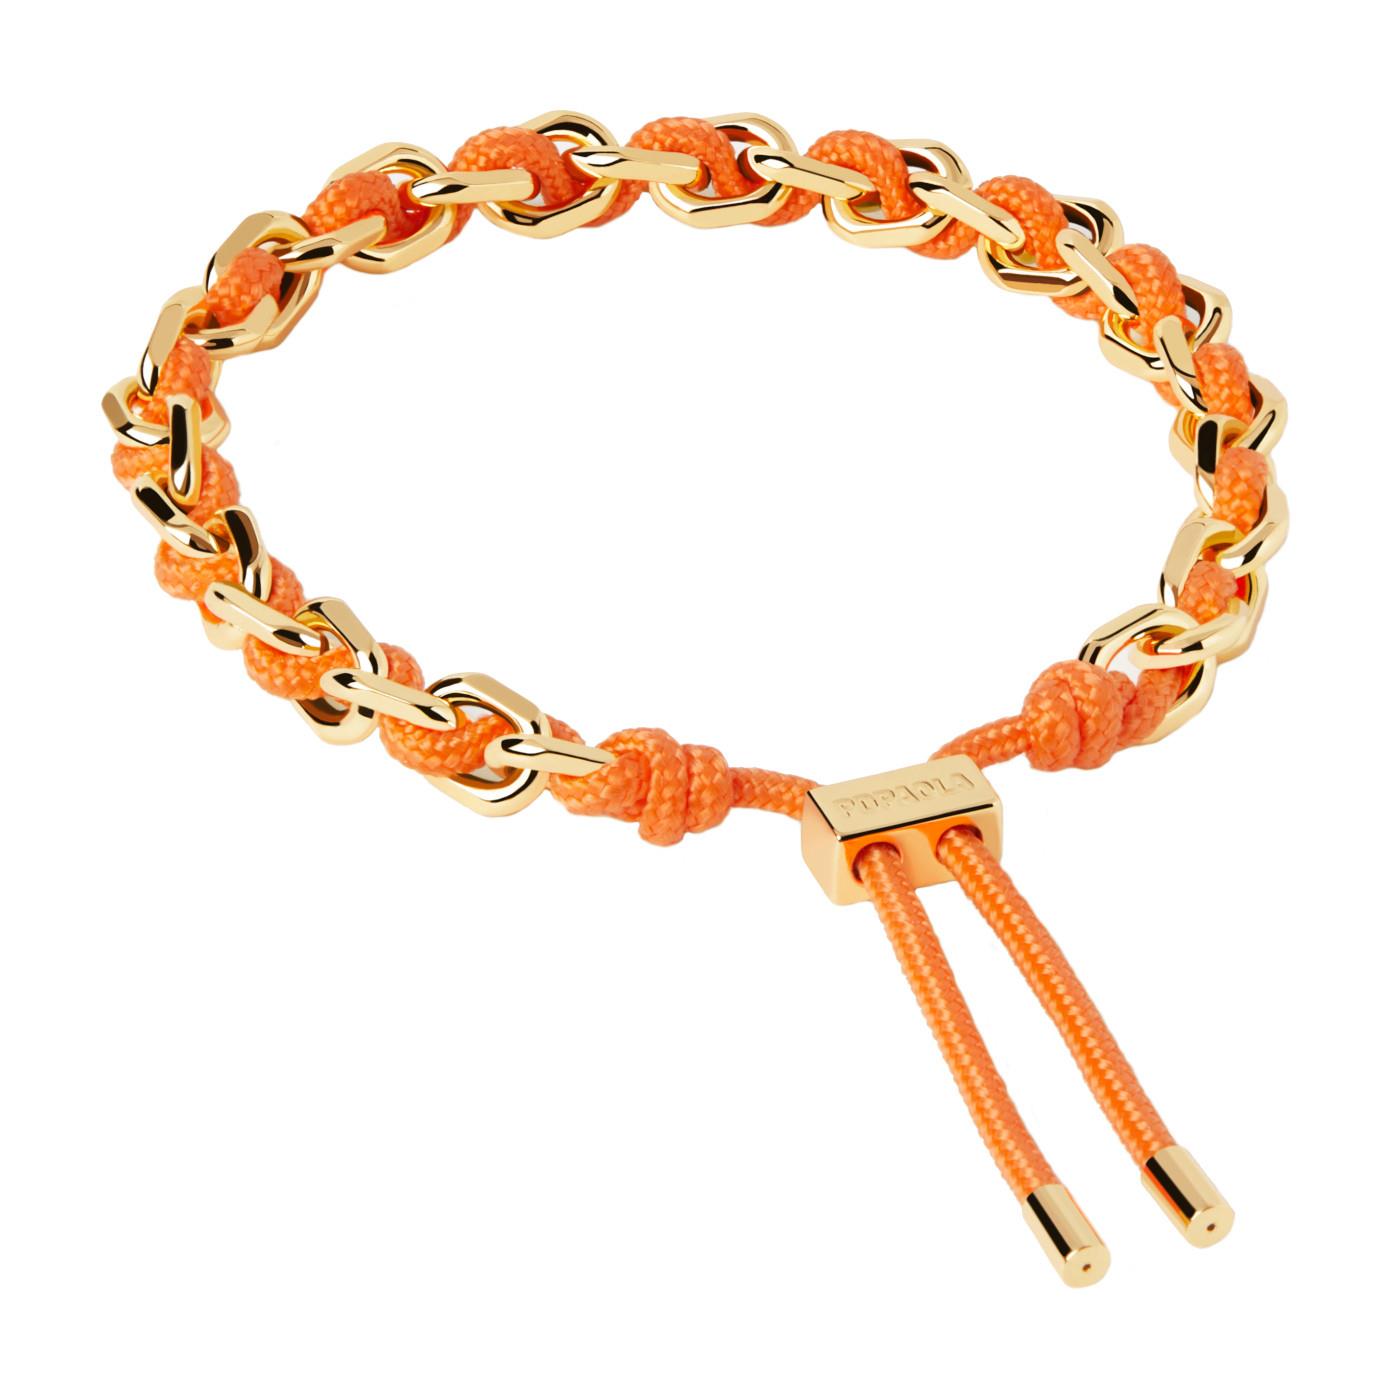 Rope bracelet in 18kt gold plated silver with orange rope - PDPAOLA